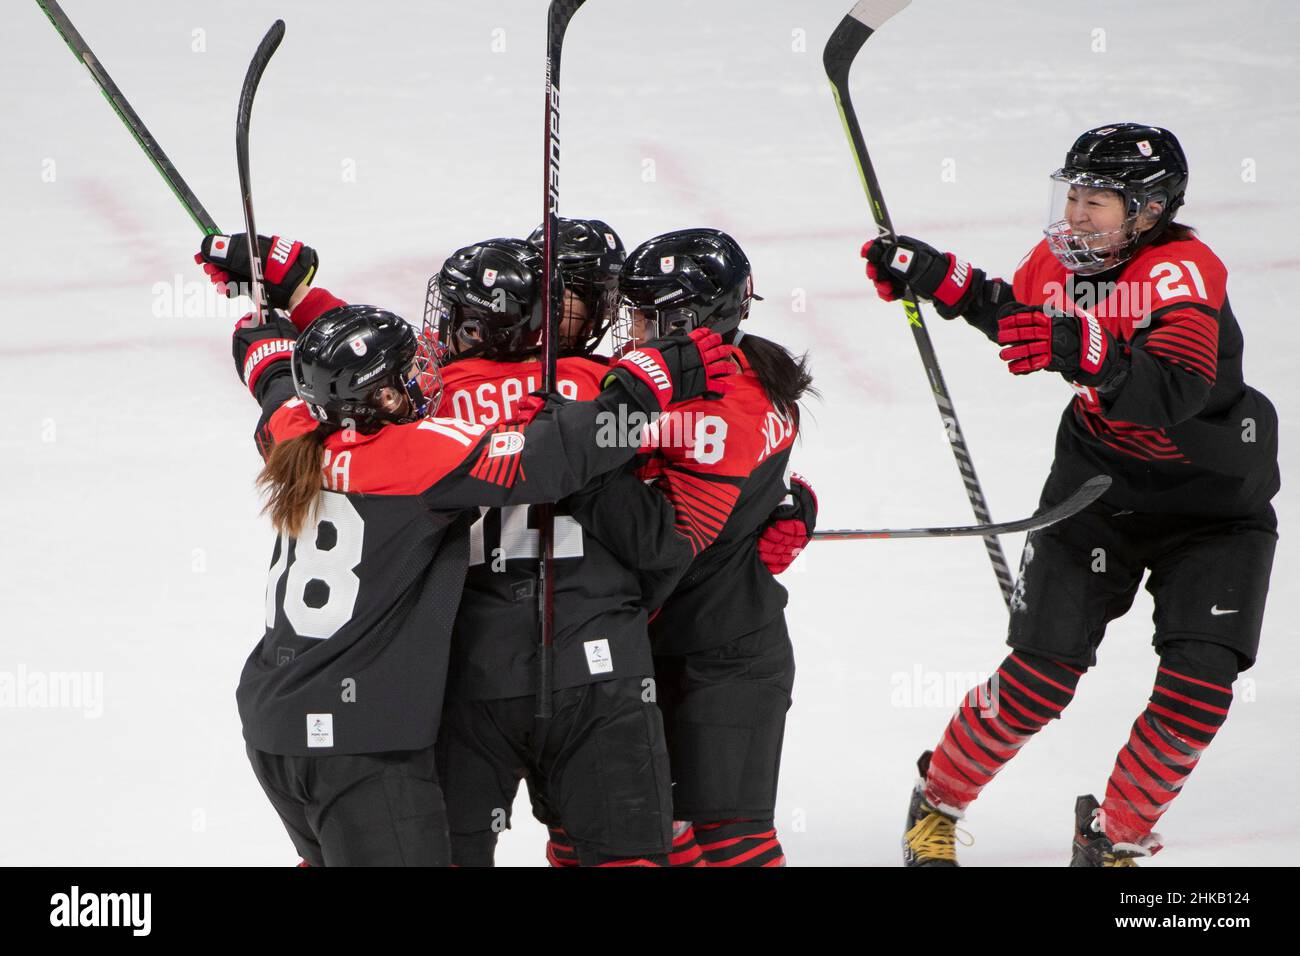 Japans Team celebrating the score (JPN) Ice Hockey Women Preliminary Roung Group B Game 3, Sweden vs Japan, 1-1 during the Beijing 2022 Olympic Winter Games at Wukesong Sports Centre, Beijing, China.